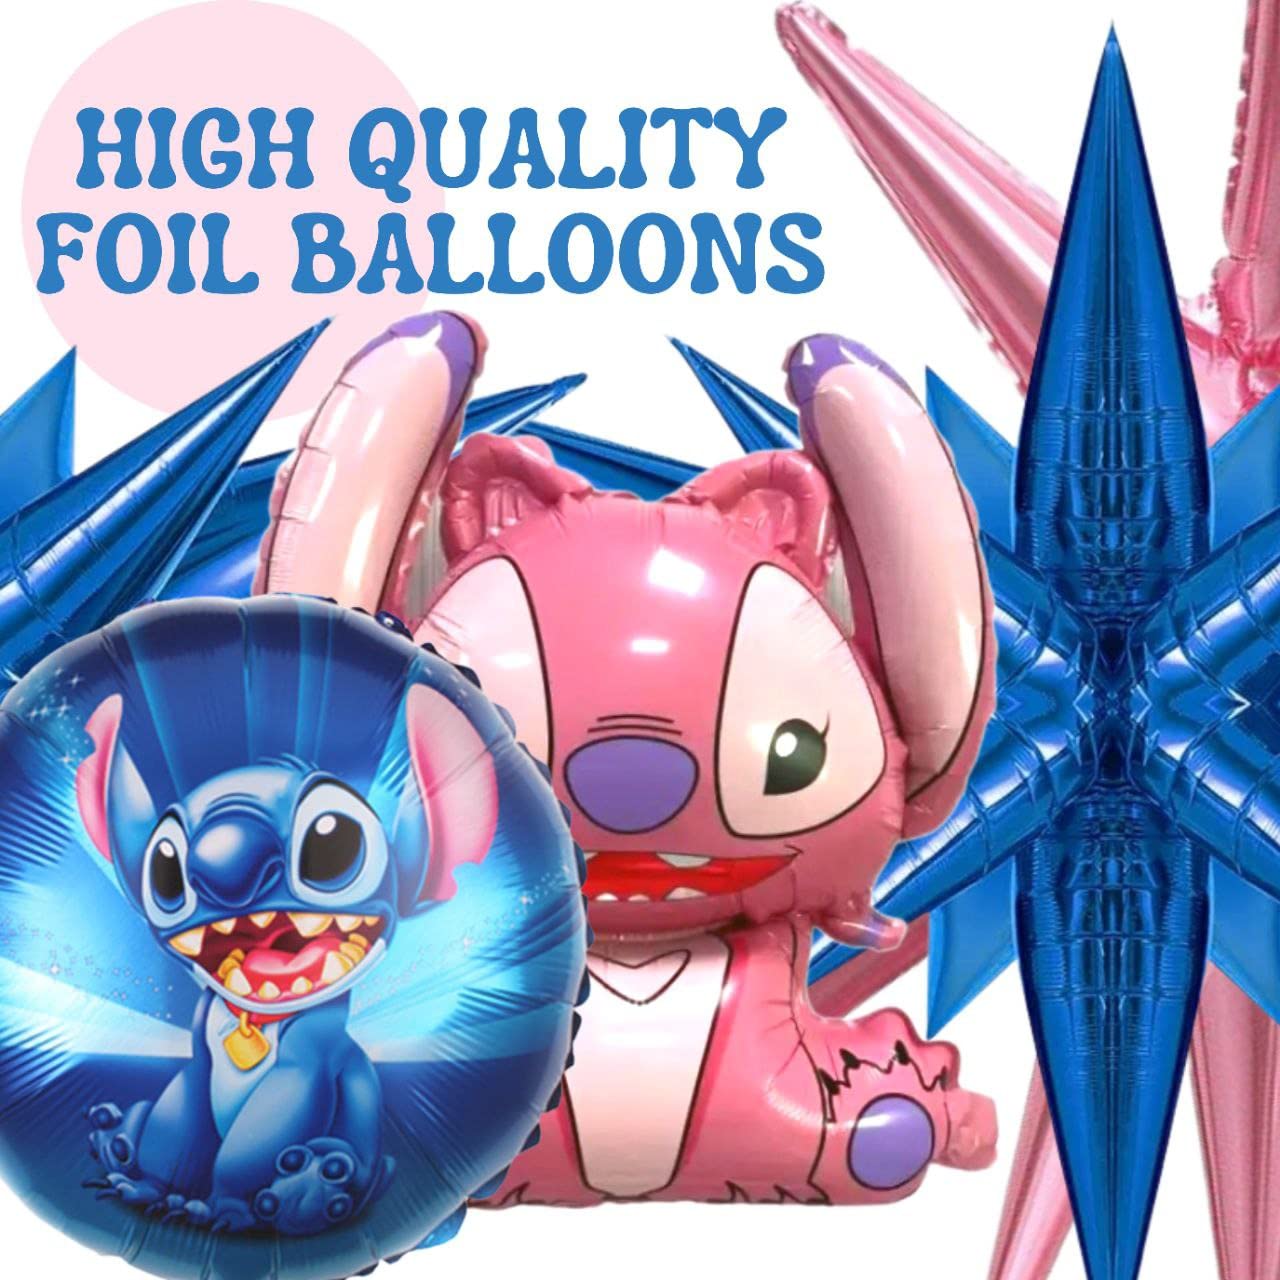 10PCS Stitch Foil Balloons 18" and 26" Angel and Stitch Balloons Birthday Party Decorations Aluminum Foil 5 Stitch Foil Balloons and 5 Angel Foil Balloons Stitch Birthday Party Décor